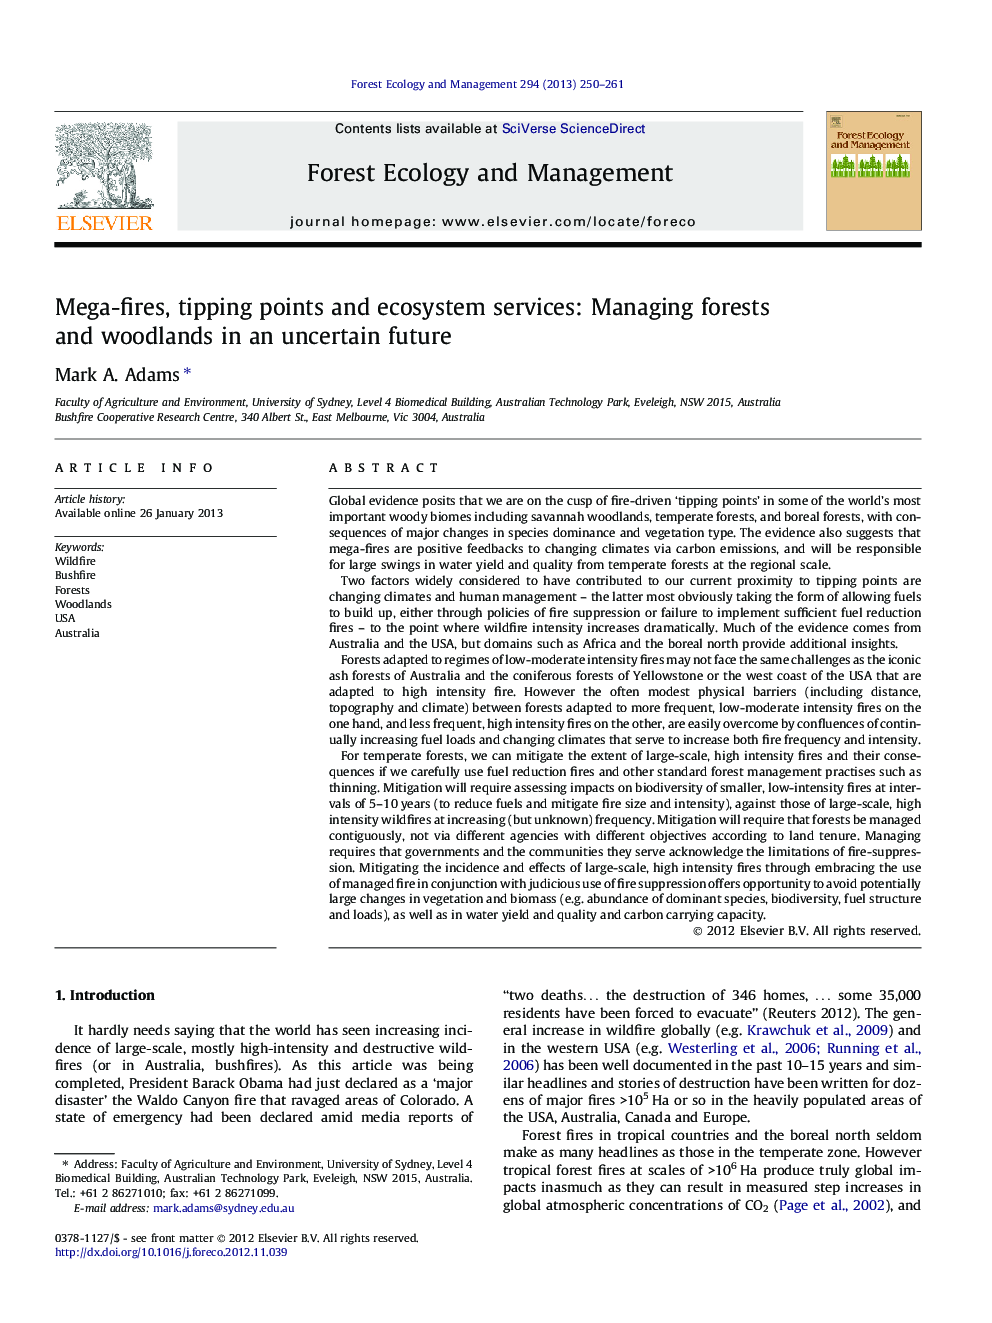 Mega-fires, tipping points and ecosystem services: Managing forests and woodlands in an uncertain future